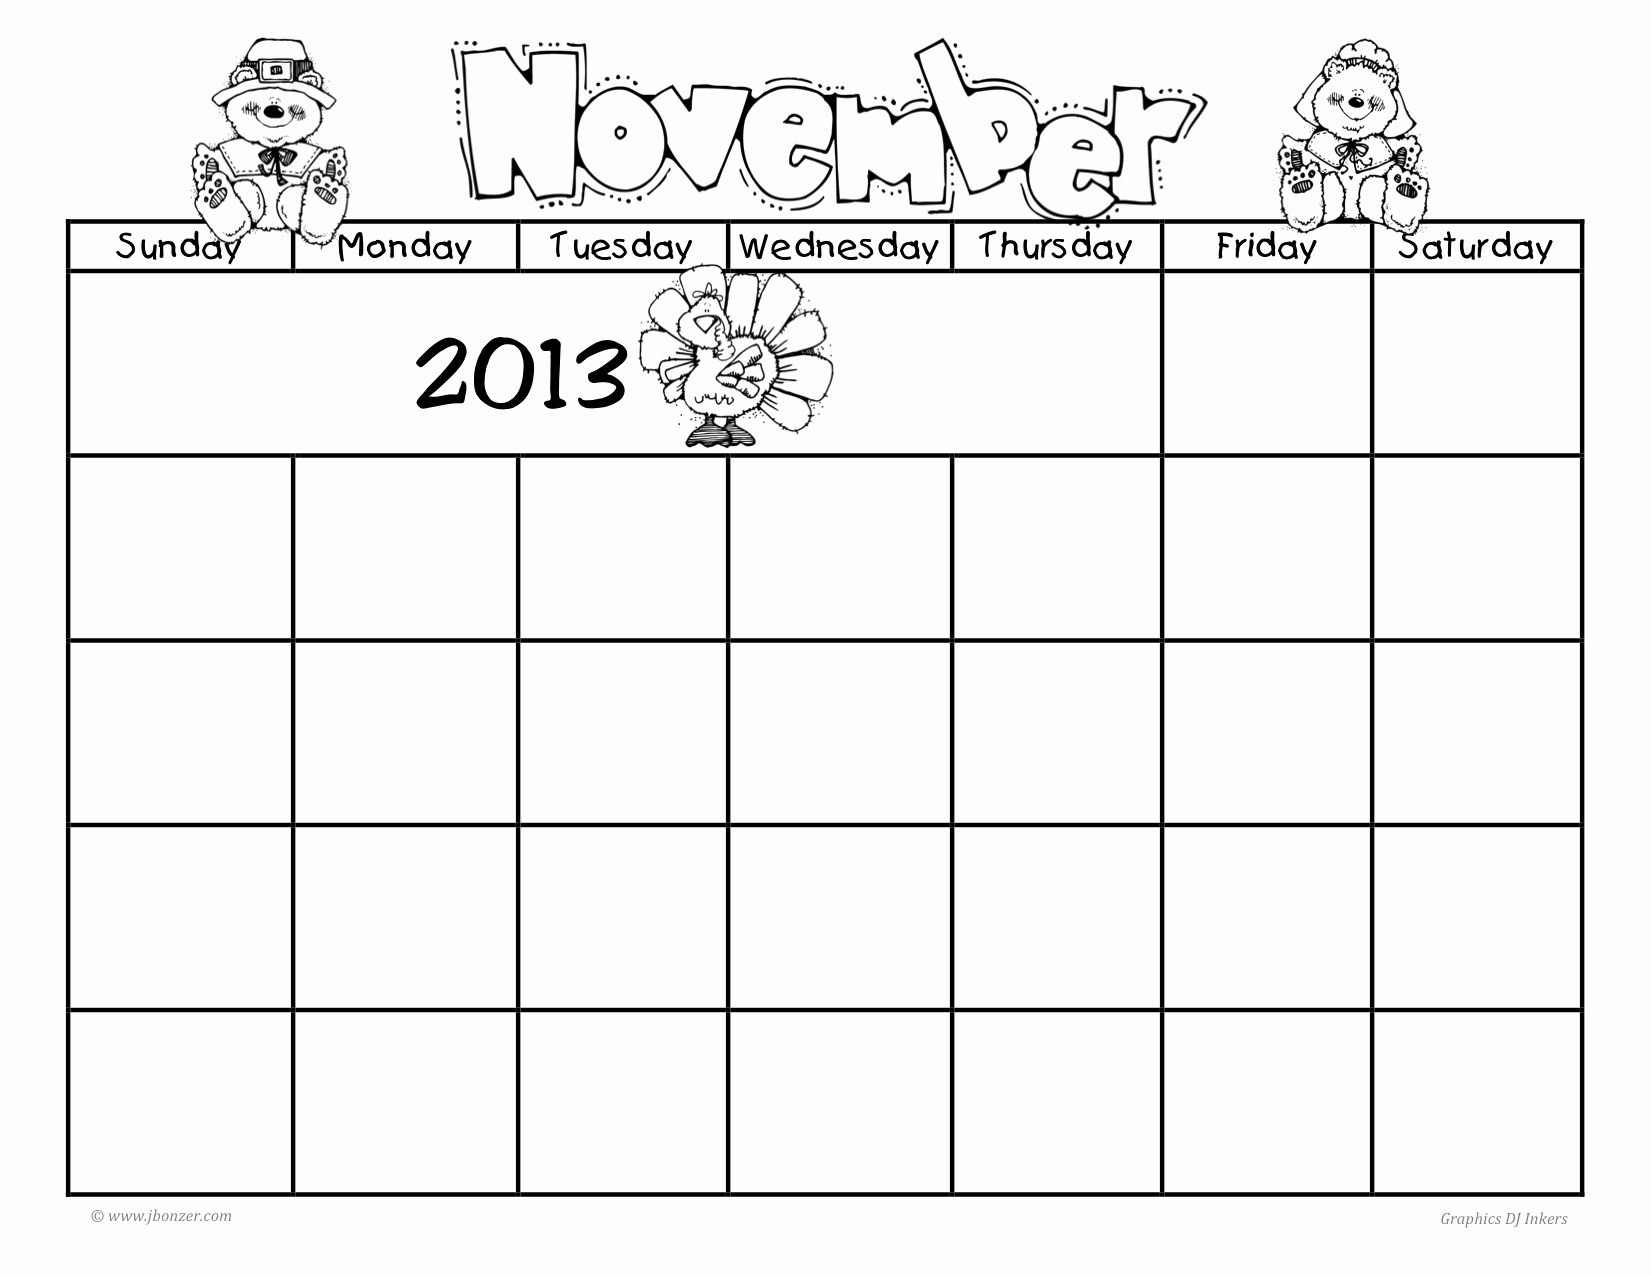 Blank Calendar to Fill In Inspirational Fill In Printable Weekly Calendar All Blank Fill In